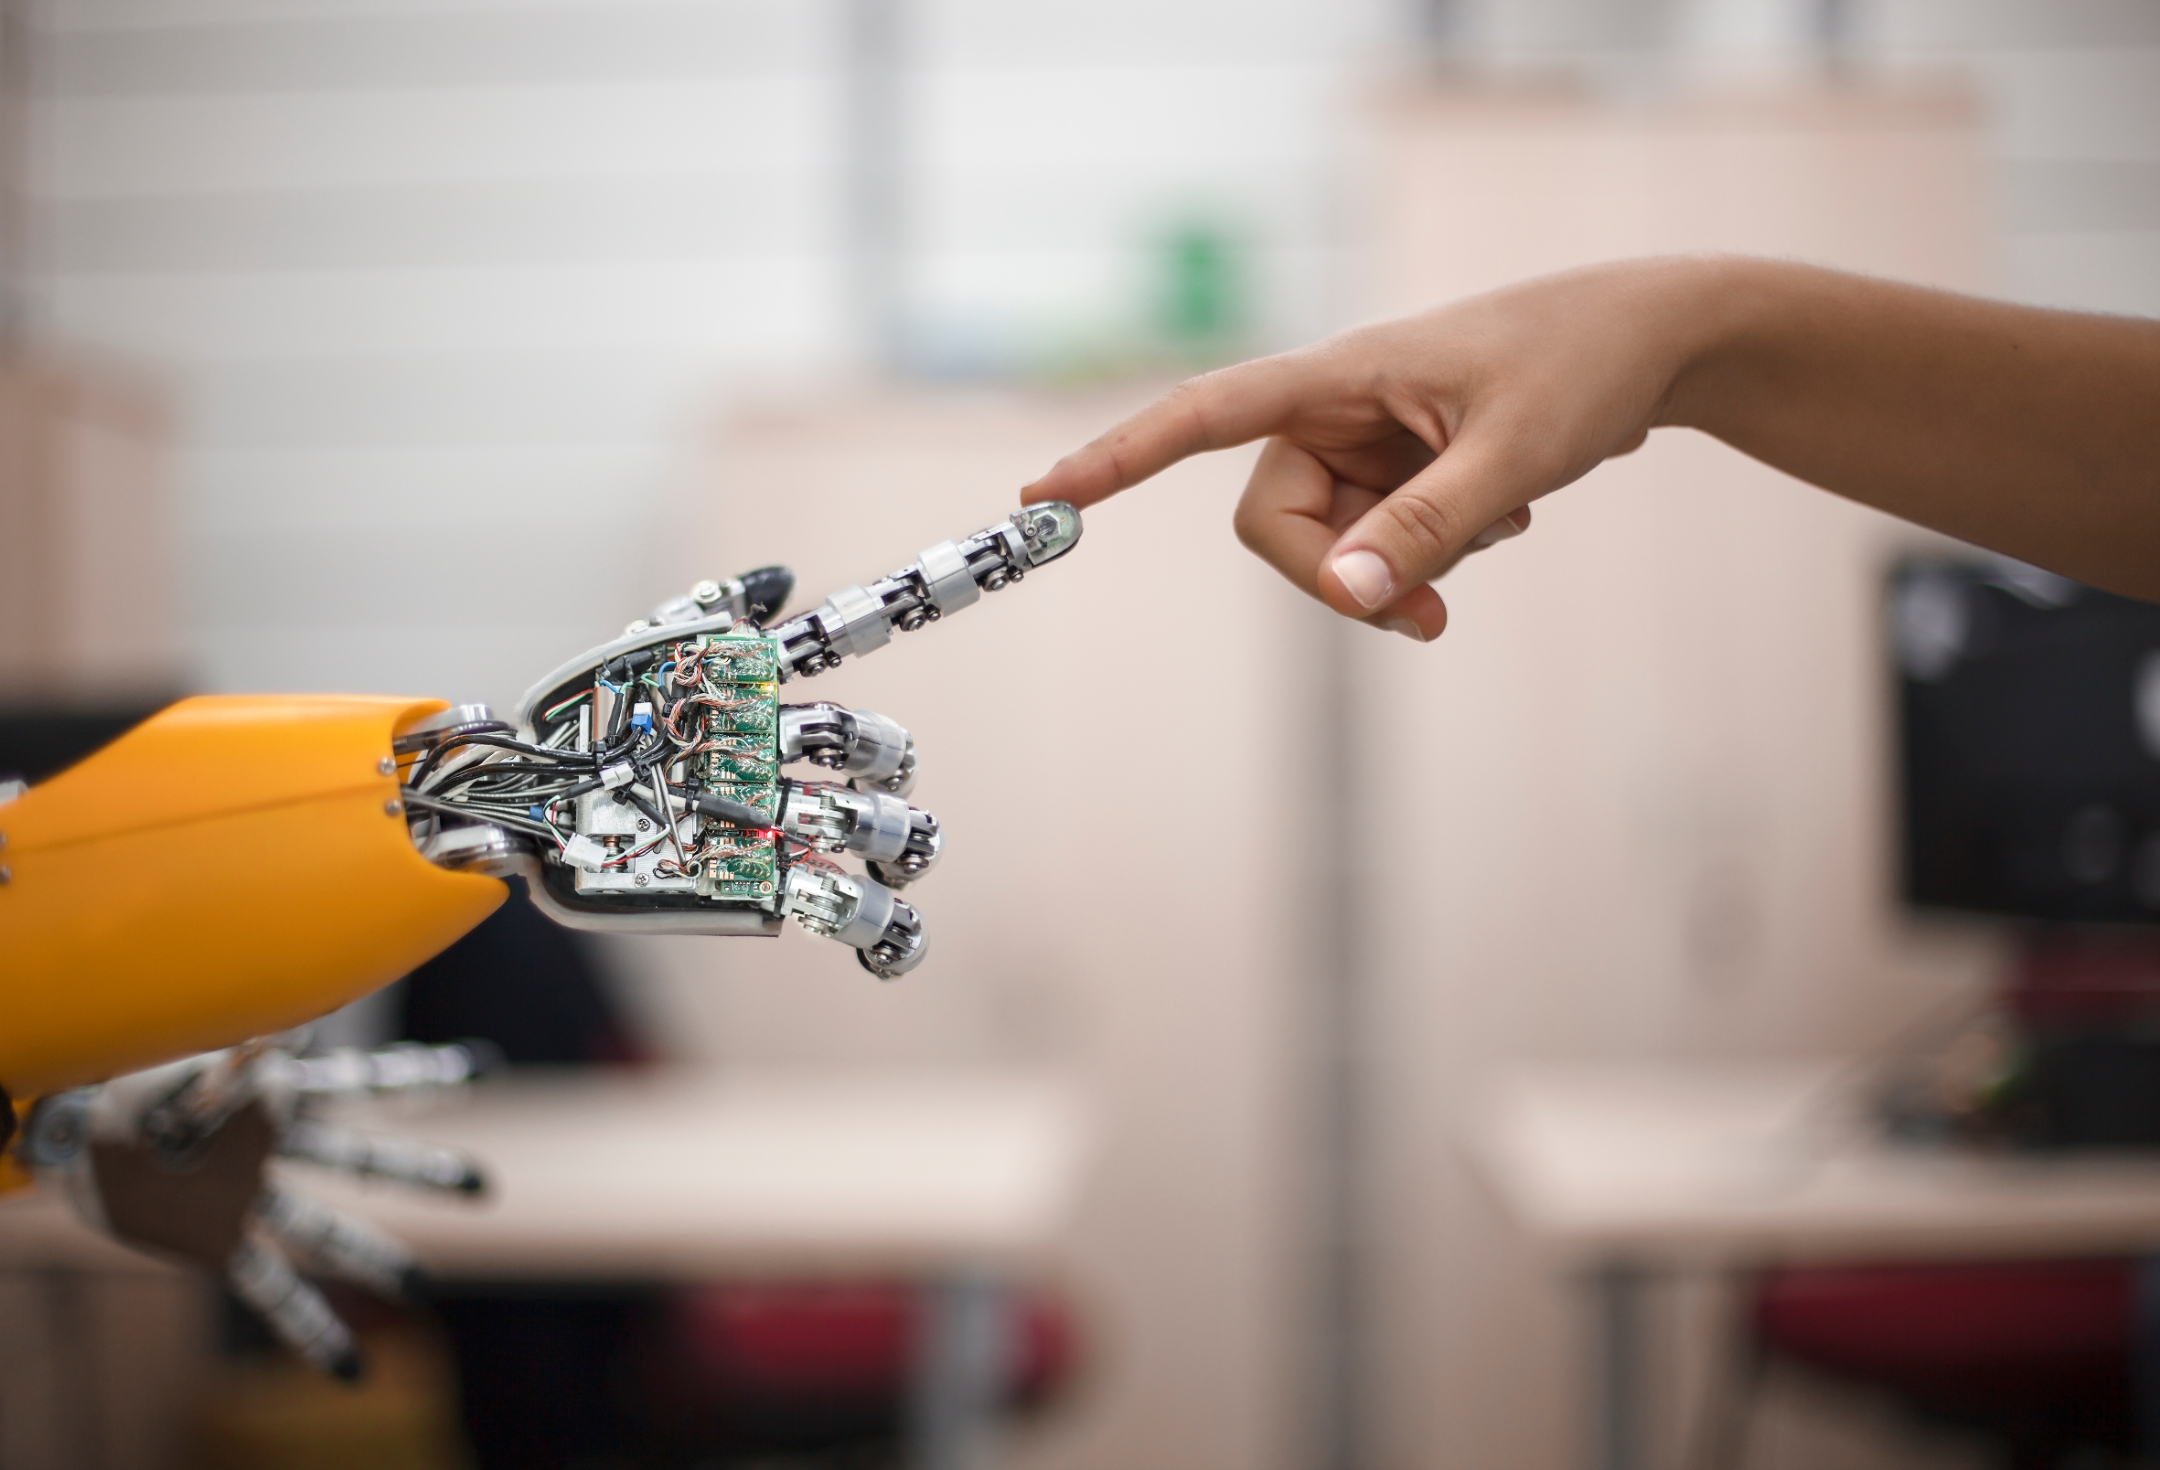 Human and robot hands touching